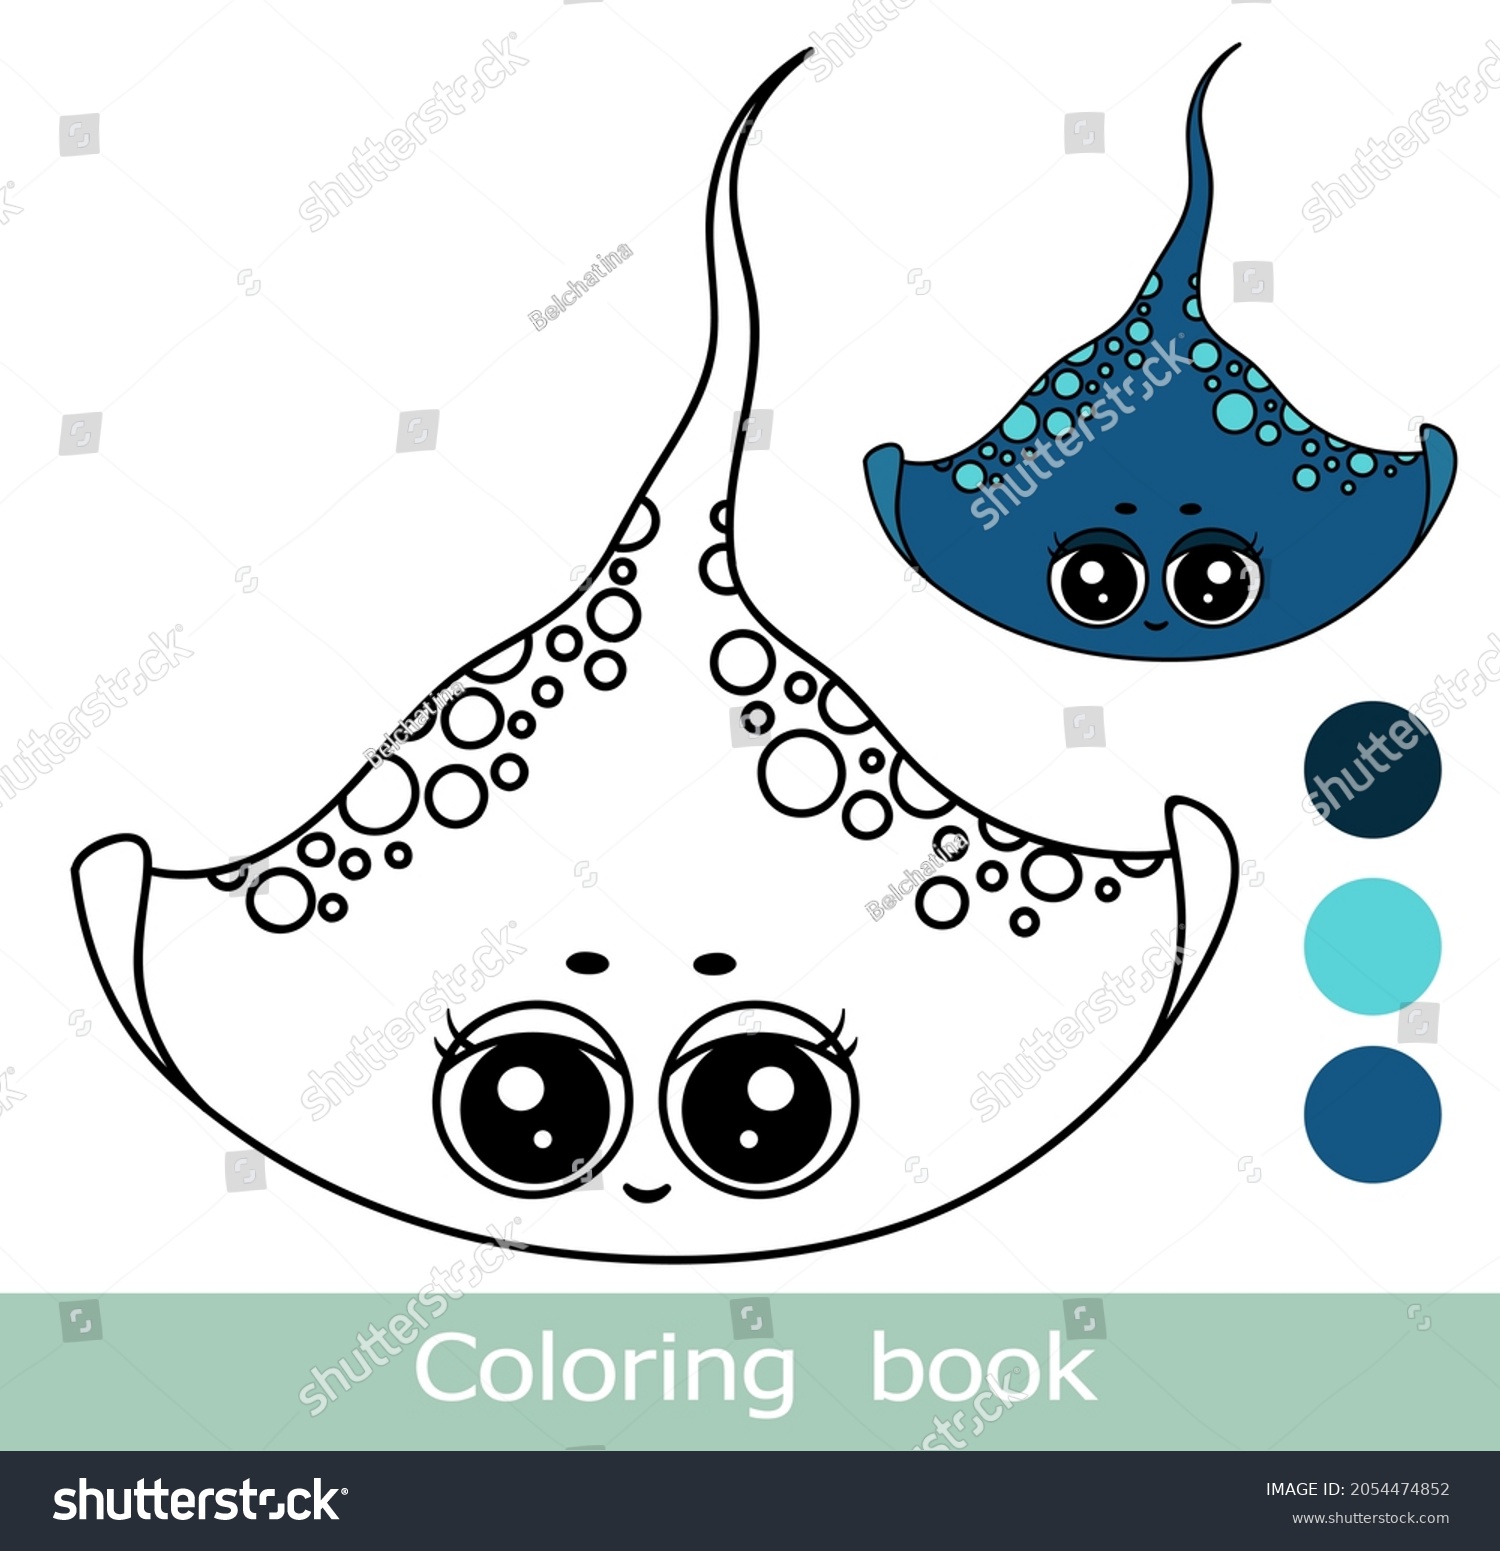 Cartoon stingray coloring book page colorful stock vector royalty free